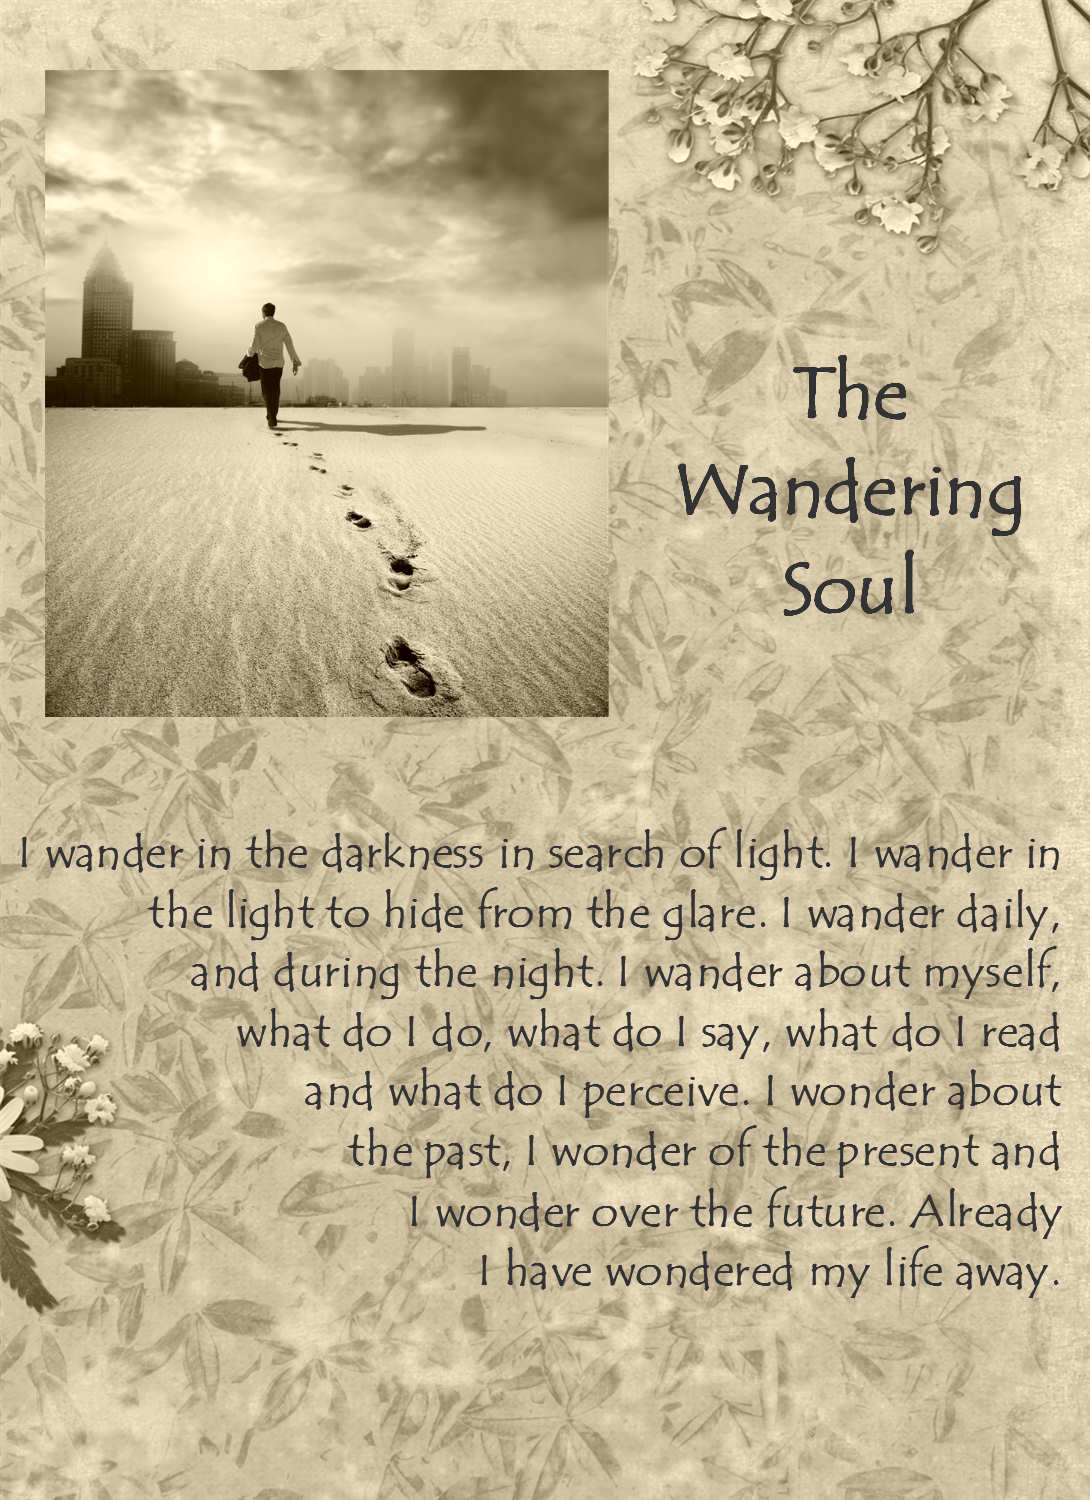 word meaning wandering soul